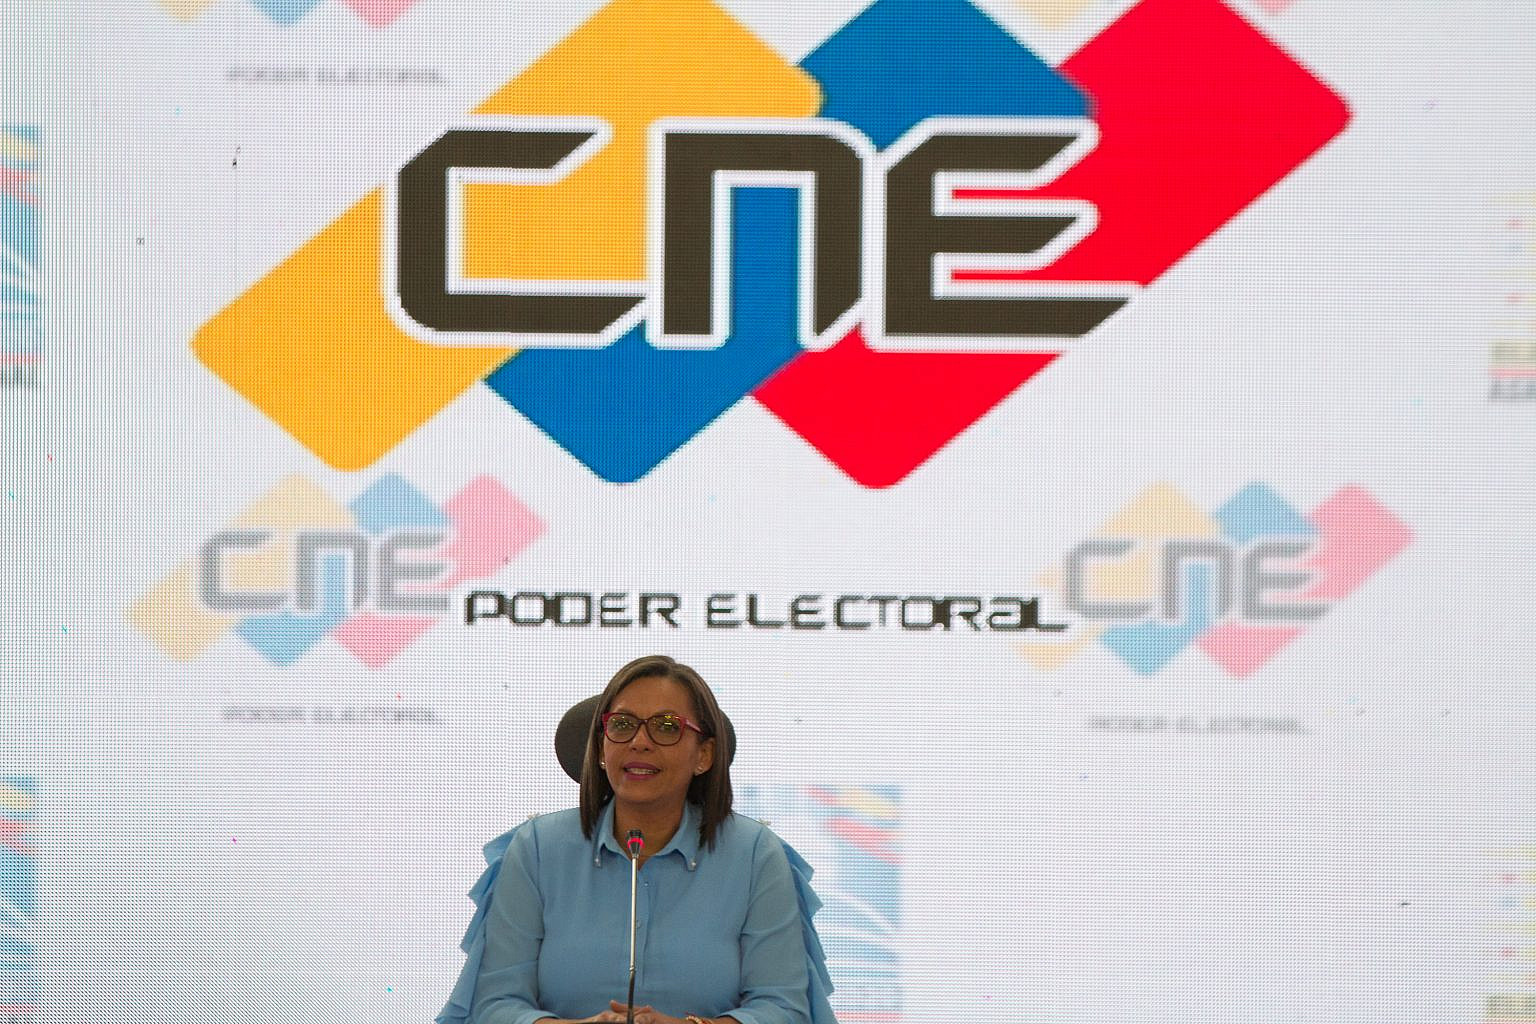 CNE's Indira Alfonzo presenting the results of 6D Parliamentary Elections